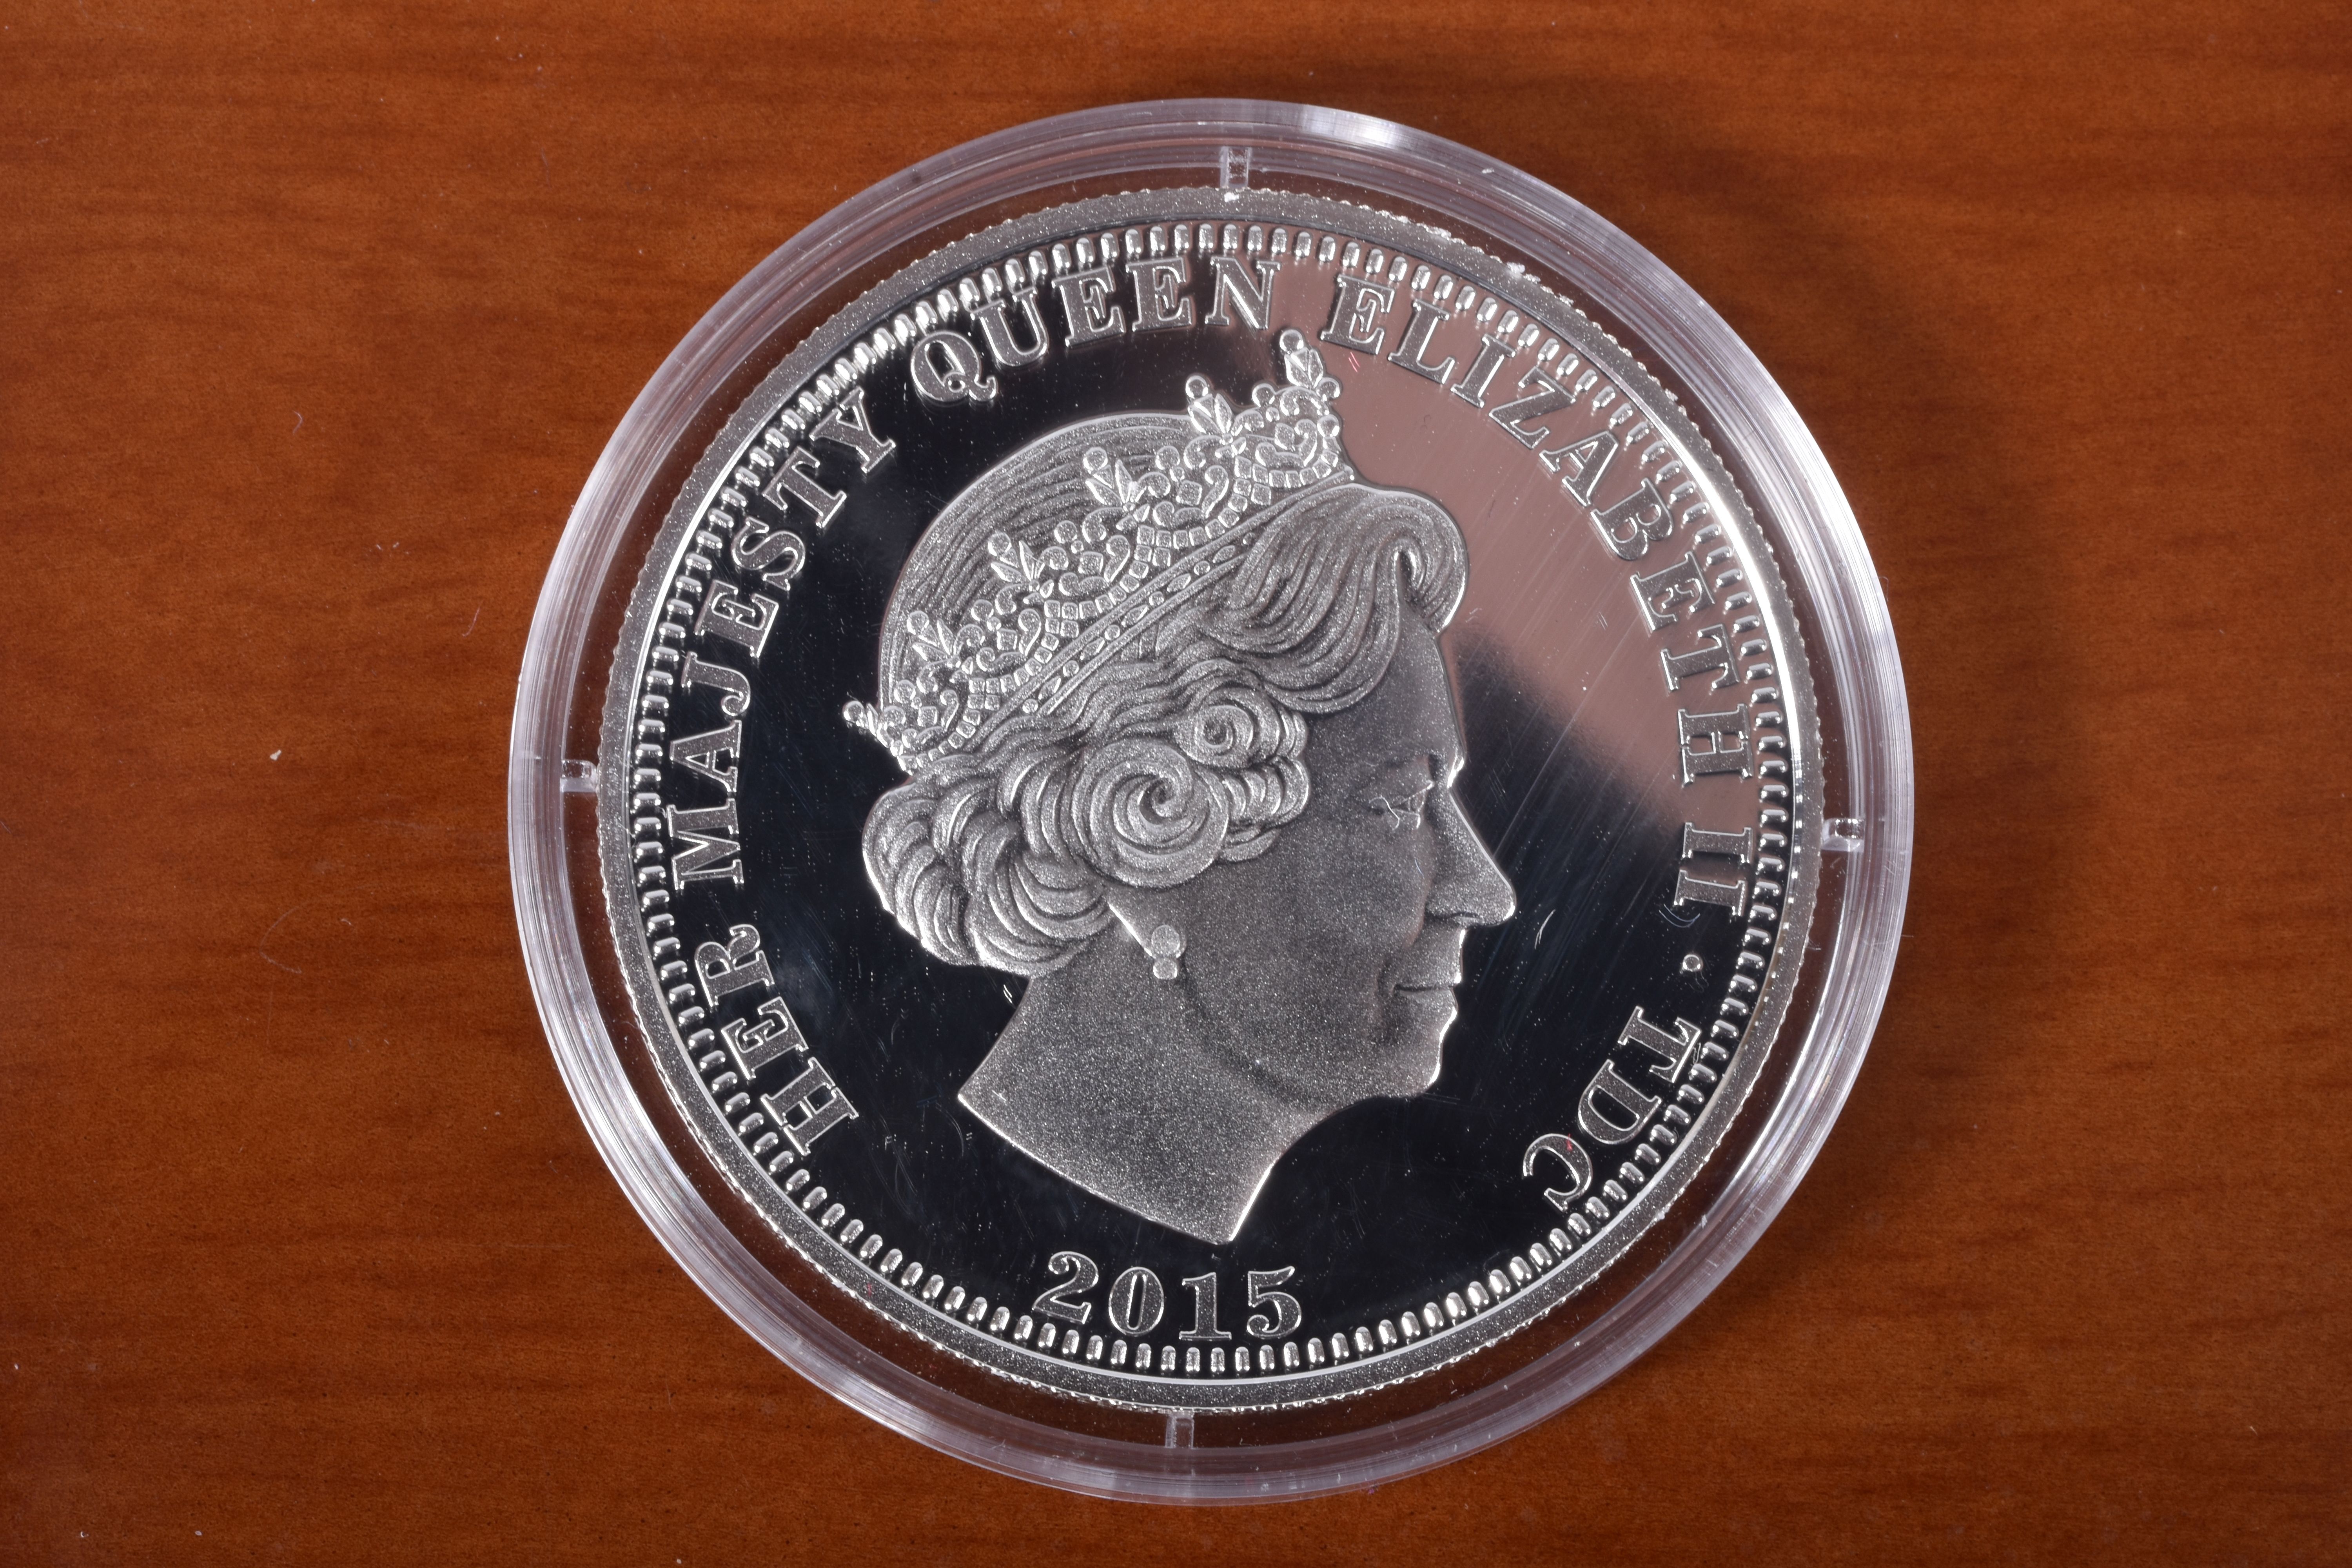 A 2012 SILVER PROOF .925 RENAMED THE ELIZABETH TOWER (Big Ben Clock Tower) 2oz Numisproof box and - Image 3 of 9